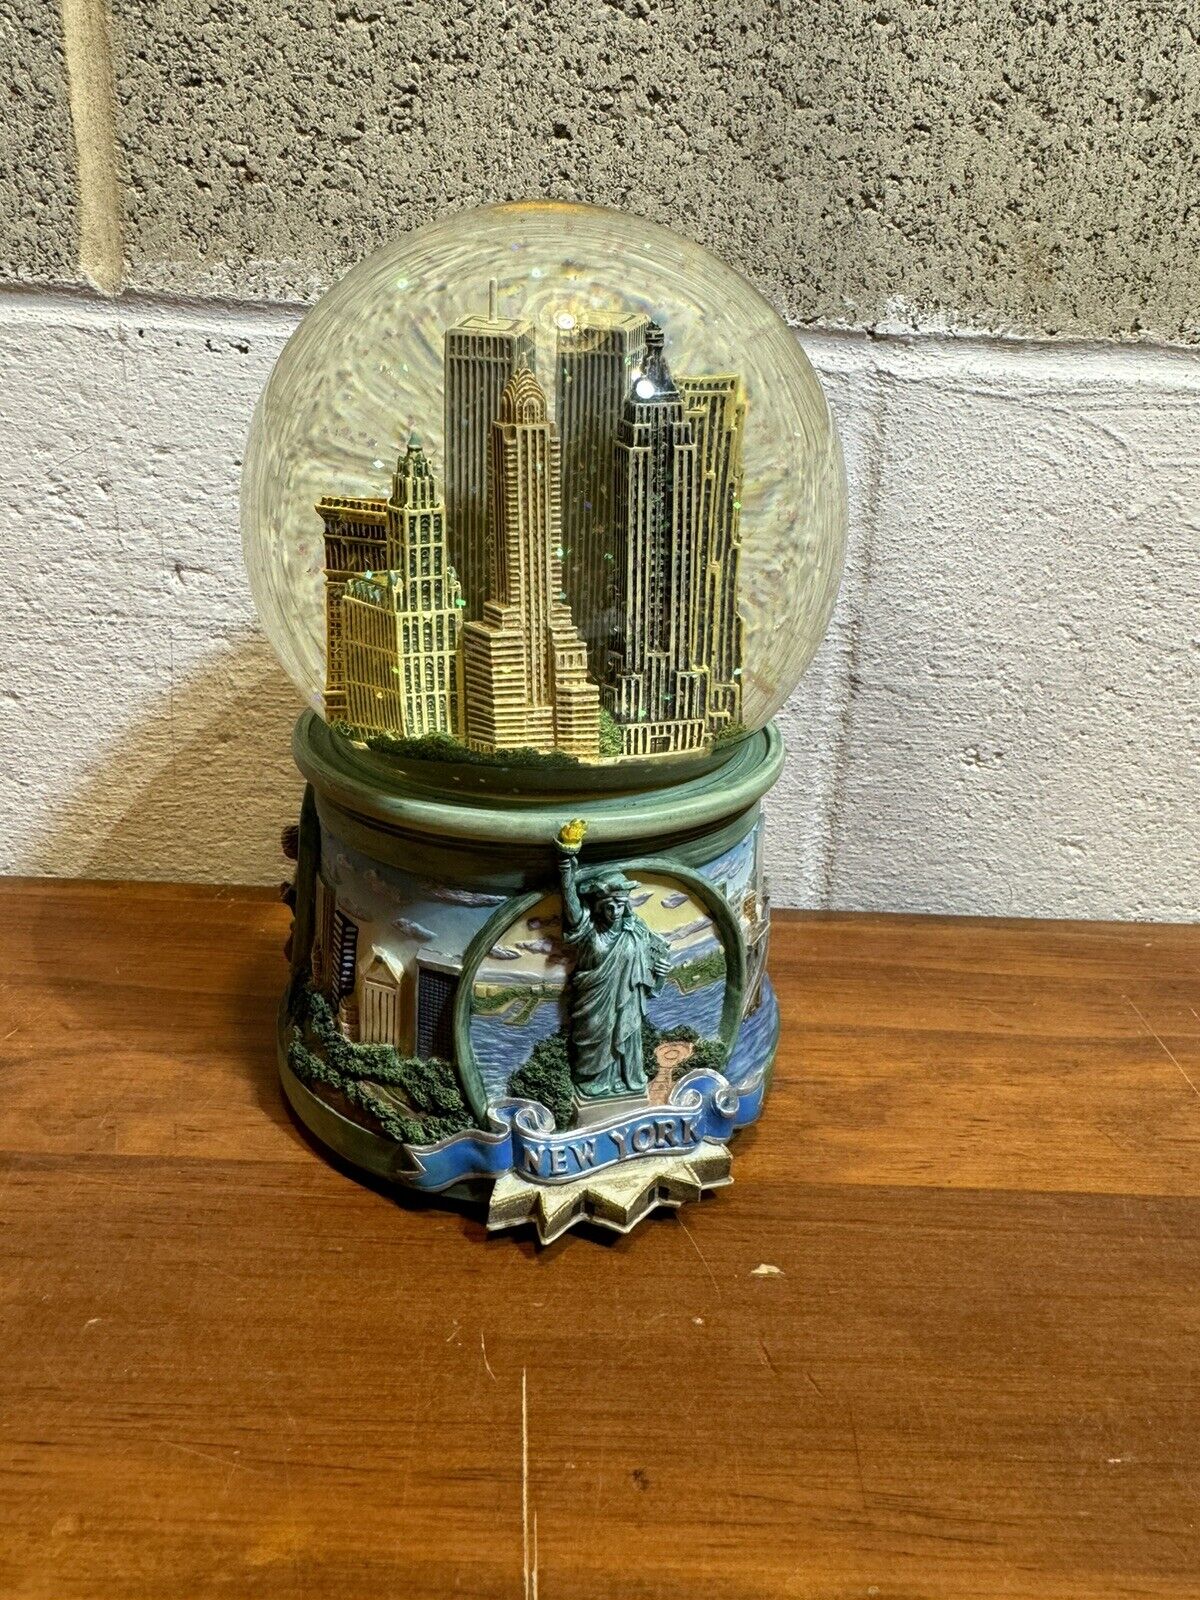 Snow Globe: New York With Twin Towers Like One In The Show “Sex In The City”